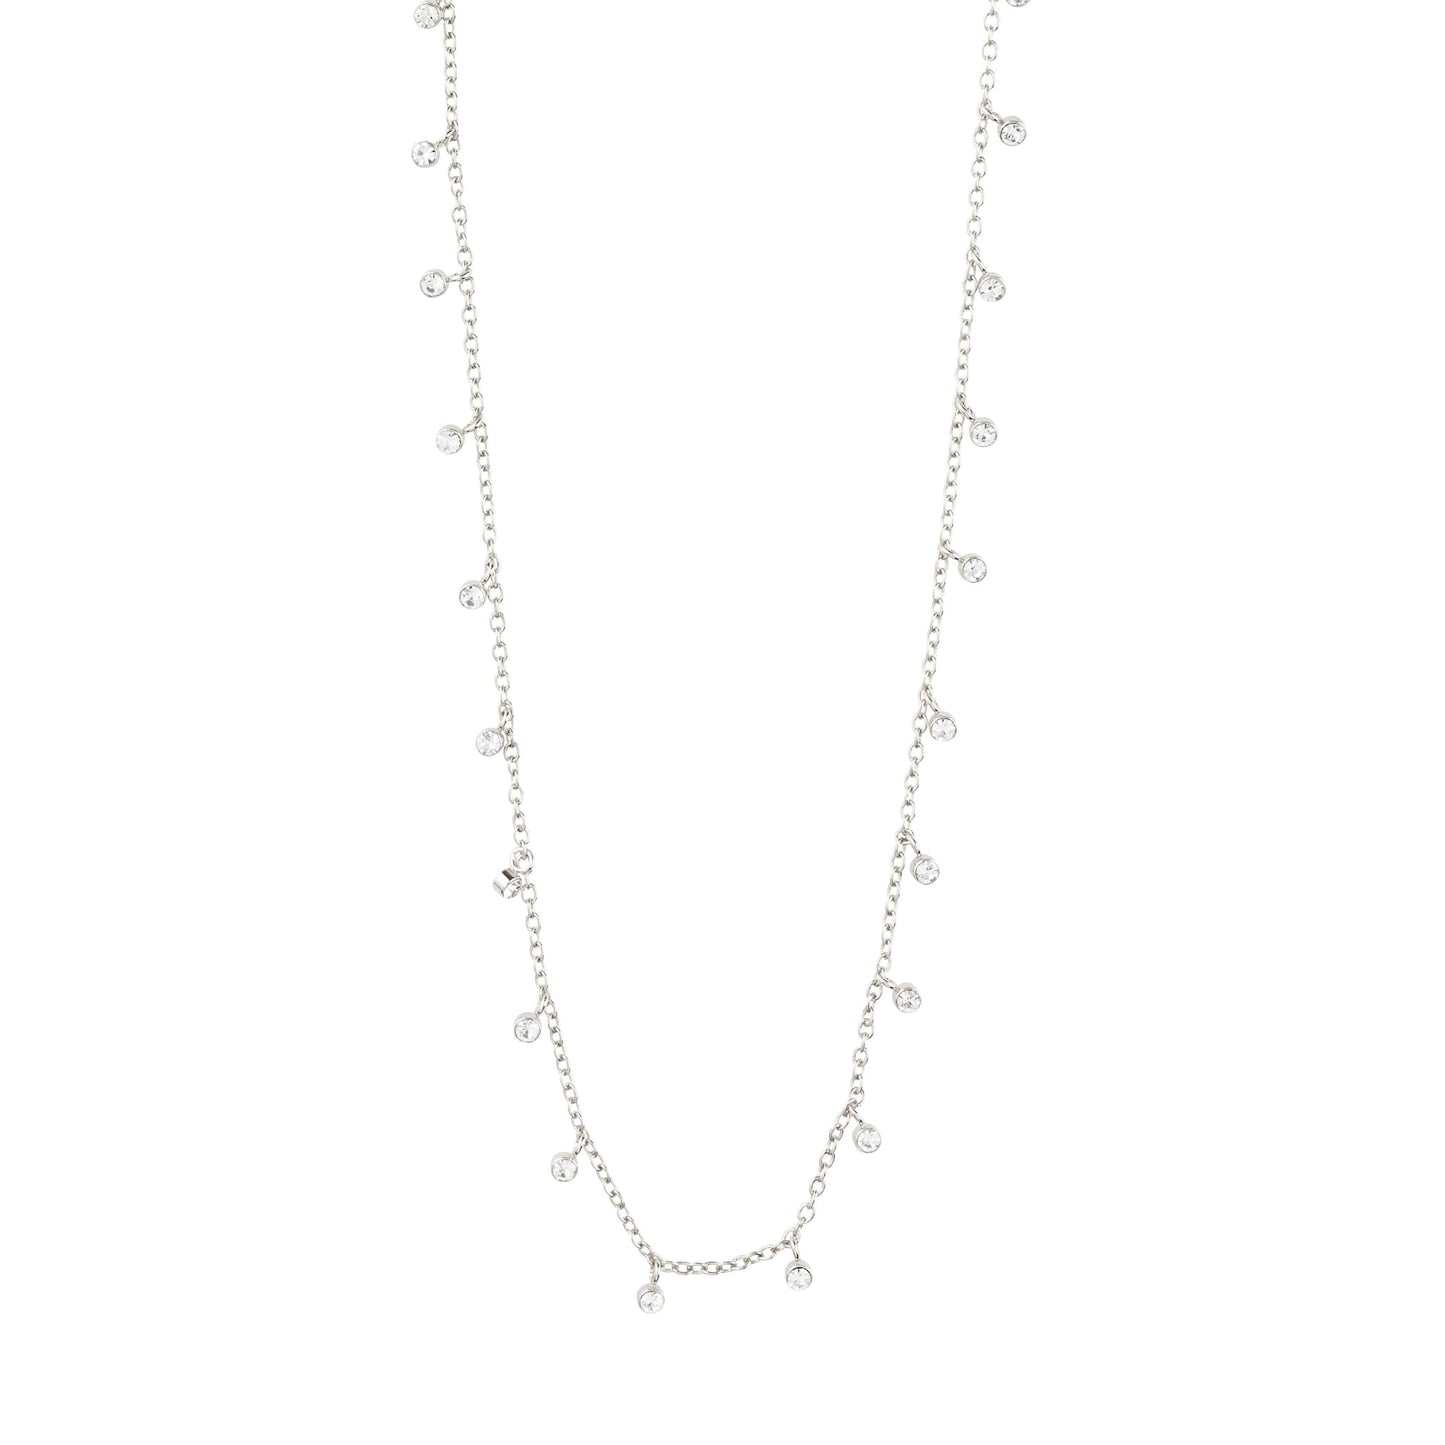 MAJA Crystal Multi Drops Necklace - Silver Plated